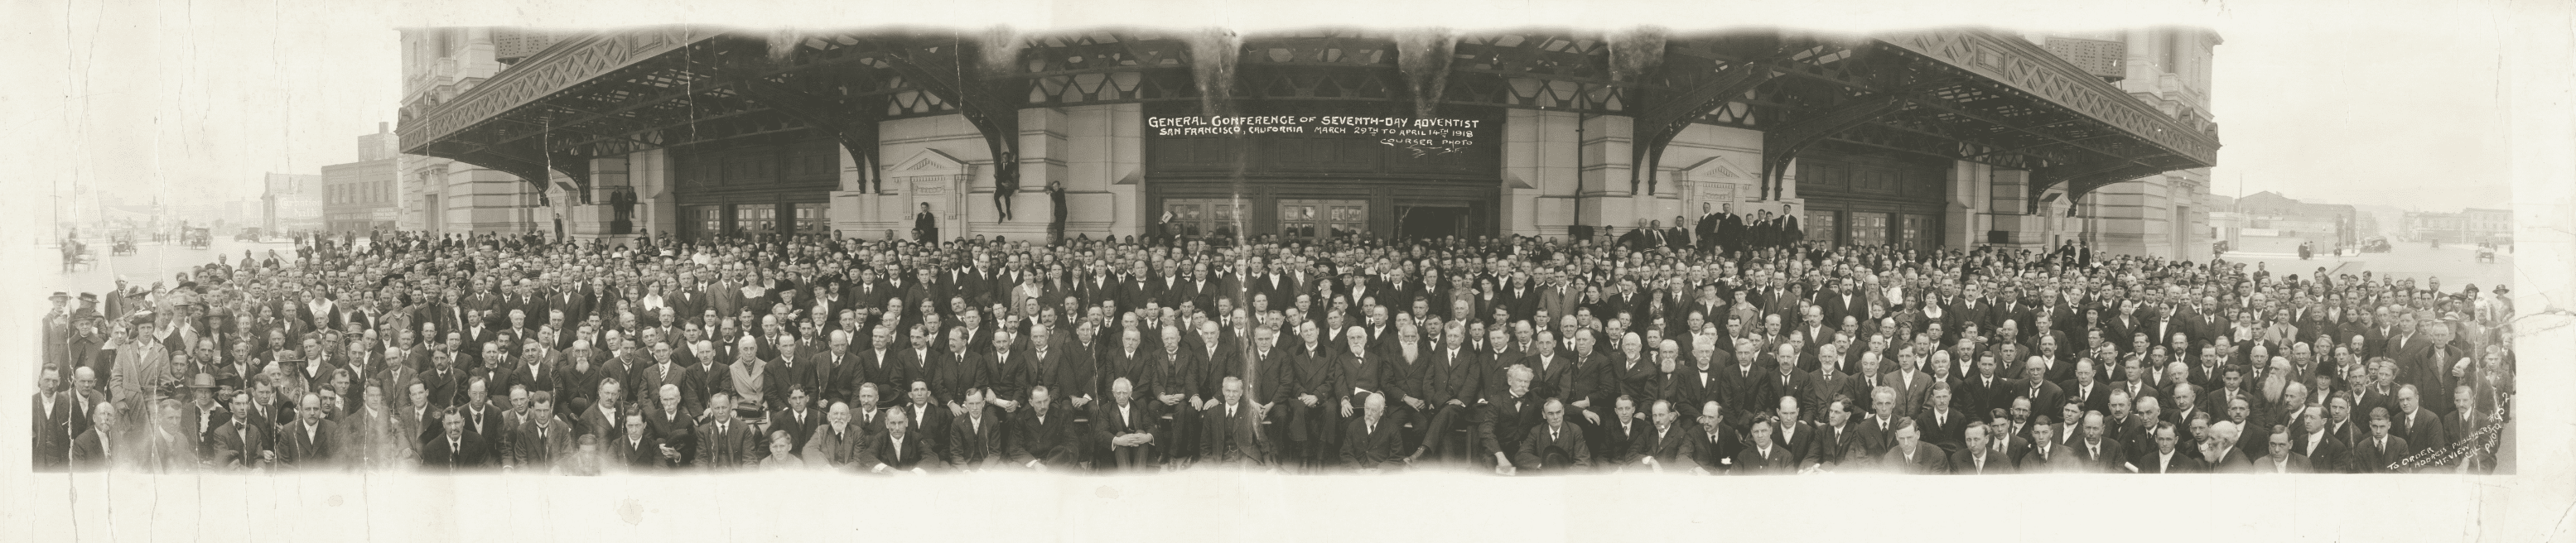 The 1918 General Conference Session [Photo: GC/ASTR]